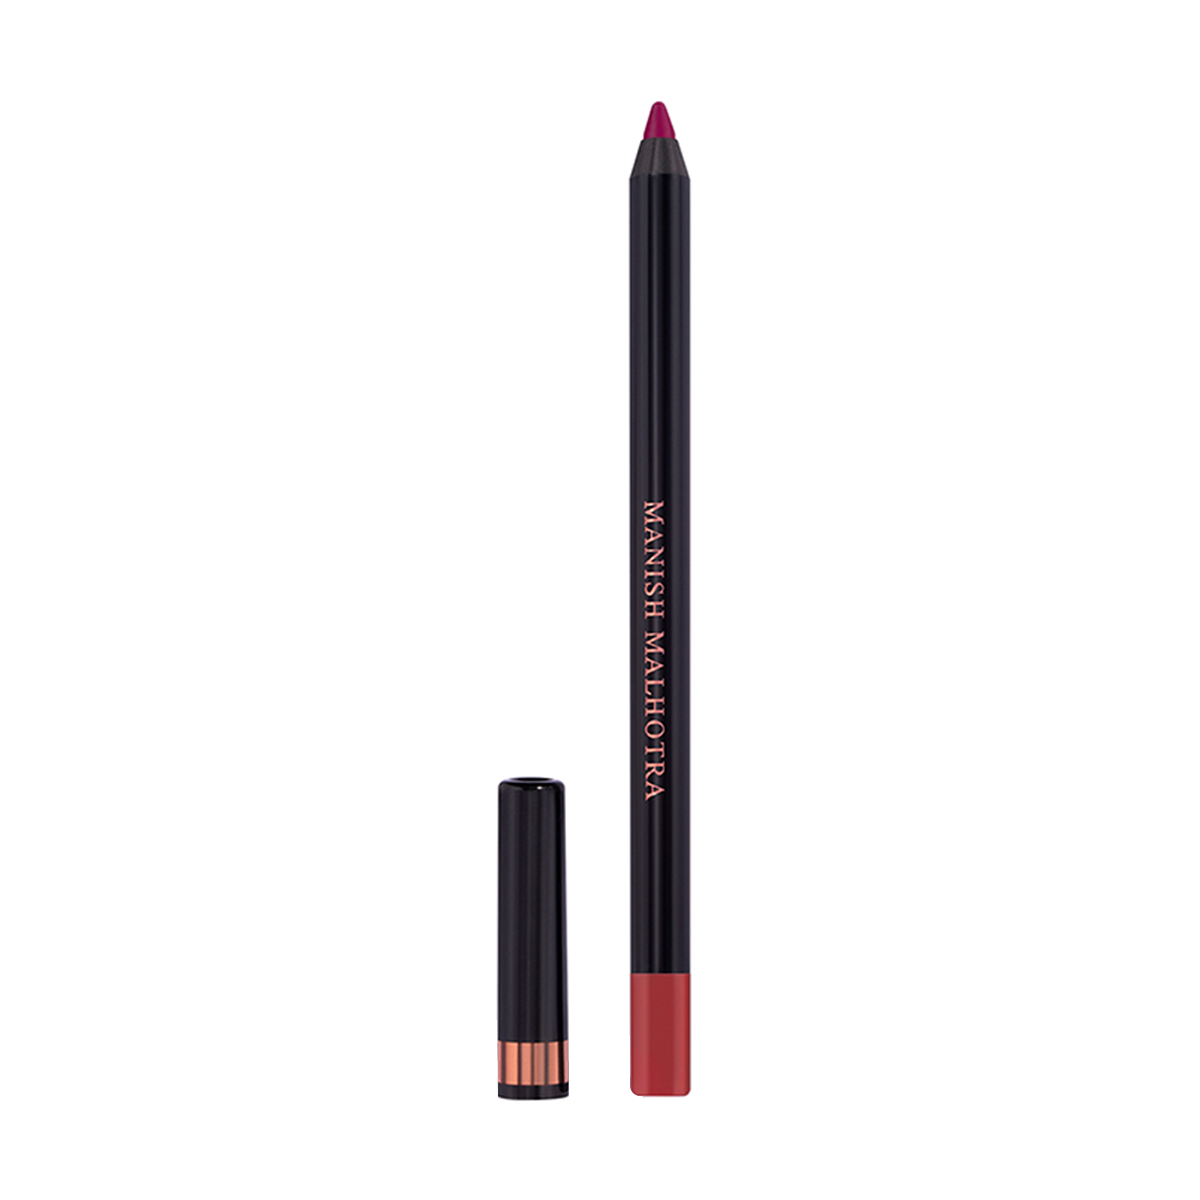 Manish Malhotra Beauty By MyGlamm Lip Liner and Filler -Red Ruse -1.2gm